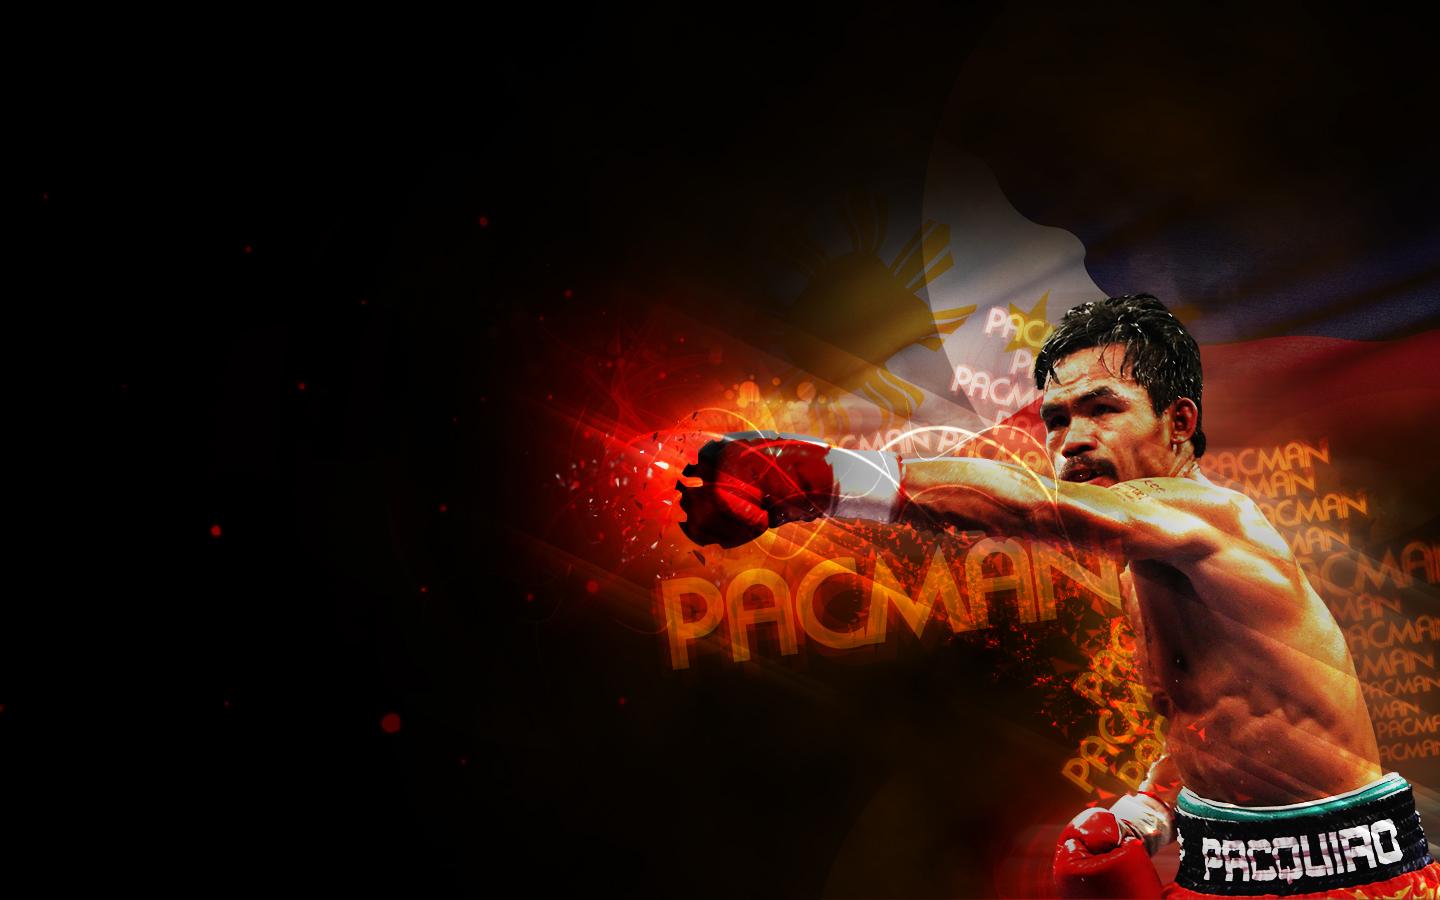 Free download Manny Pacquiao Image Wallpaper 15529 Wallpaper